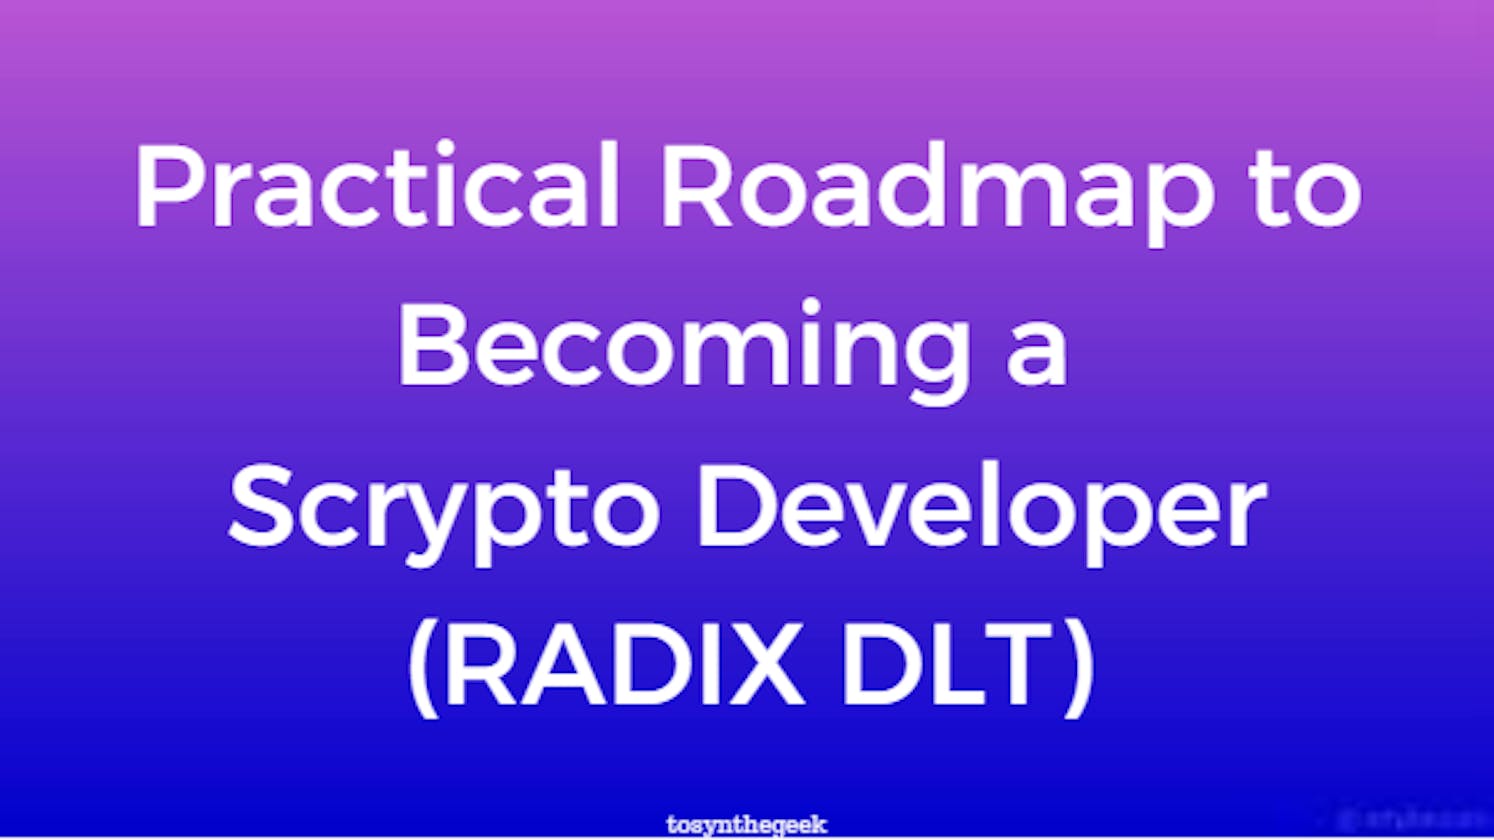 Practical Roadmap to Becoming a Scrypto Developer (Radix DLT)